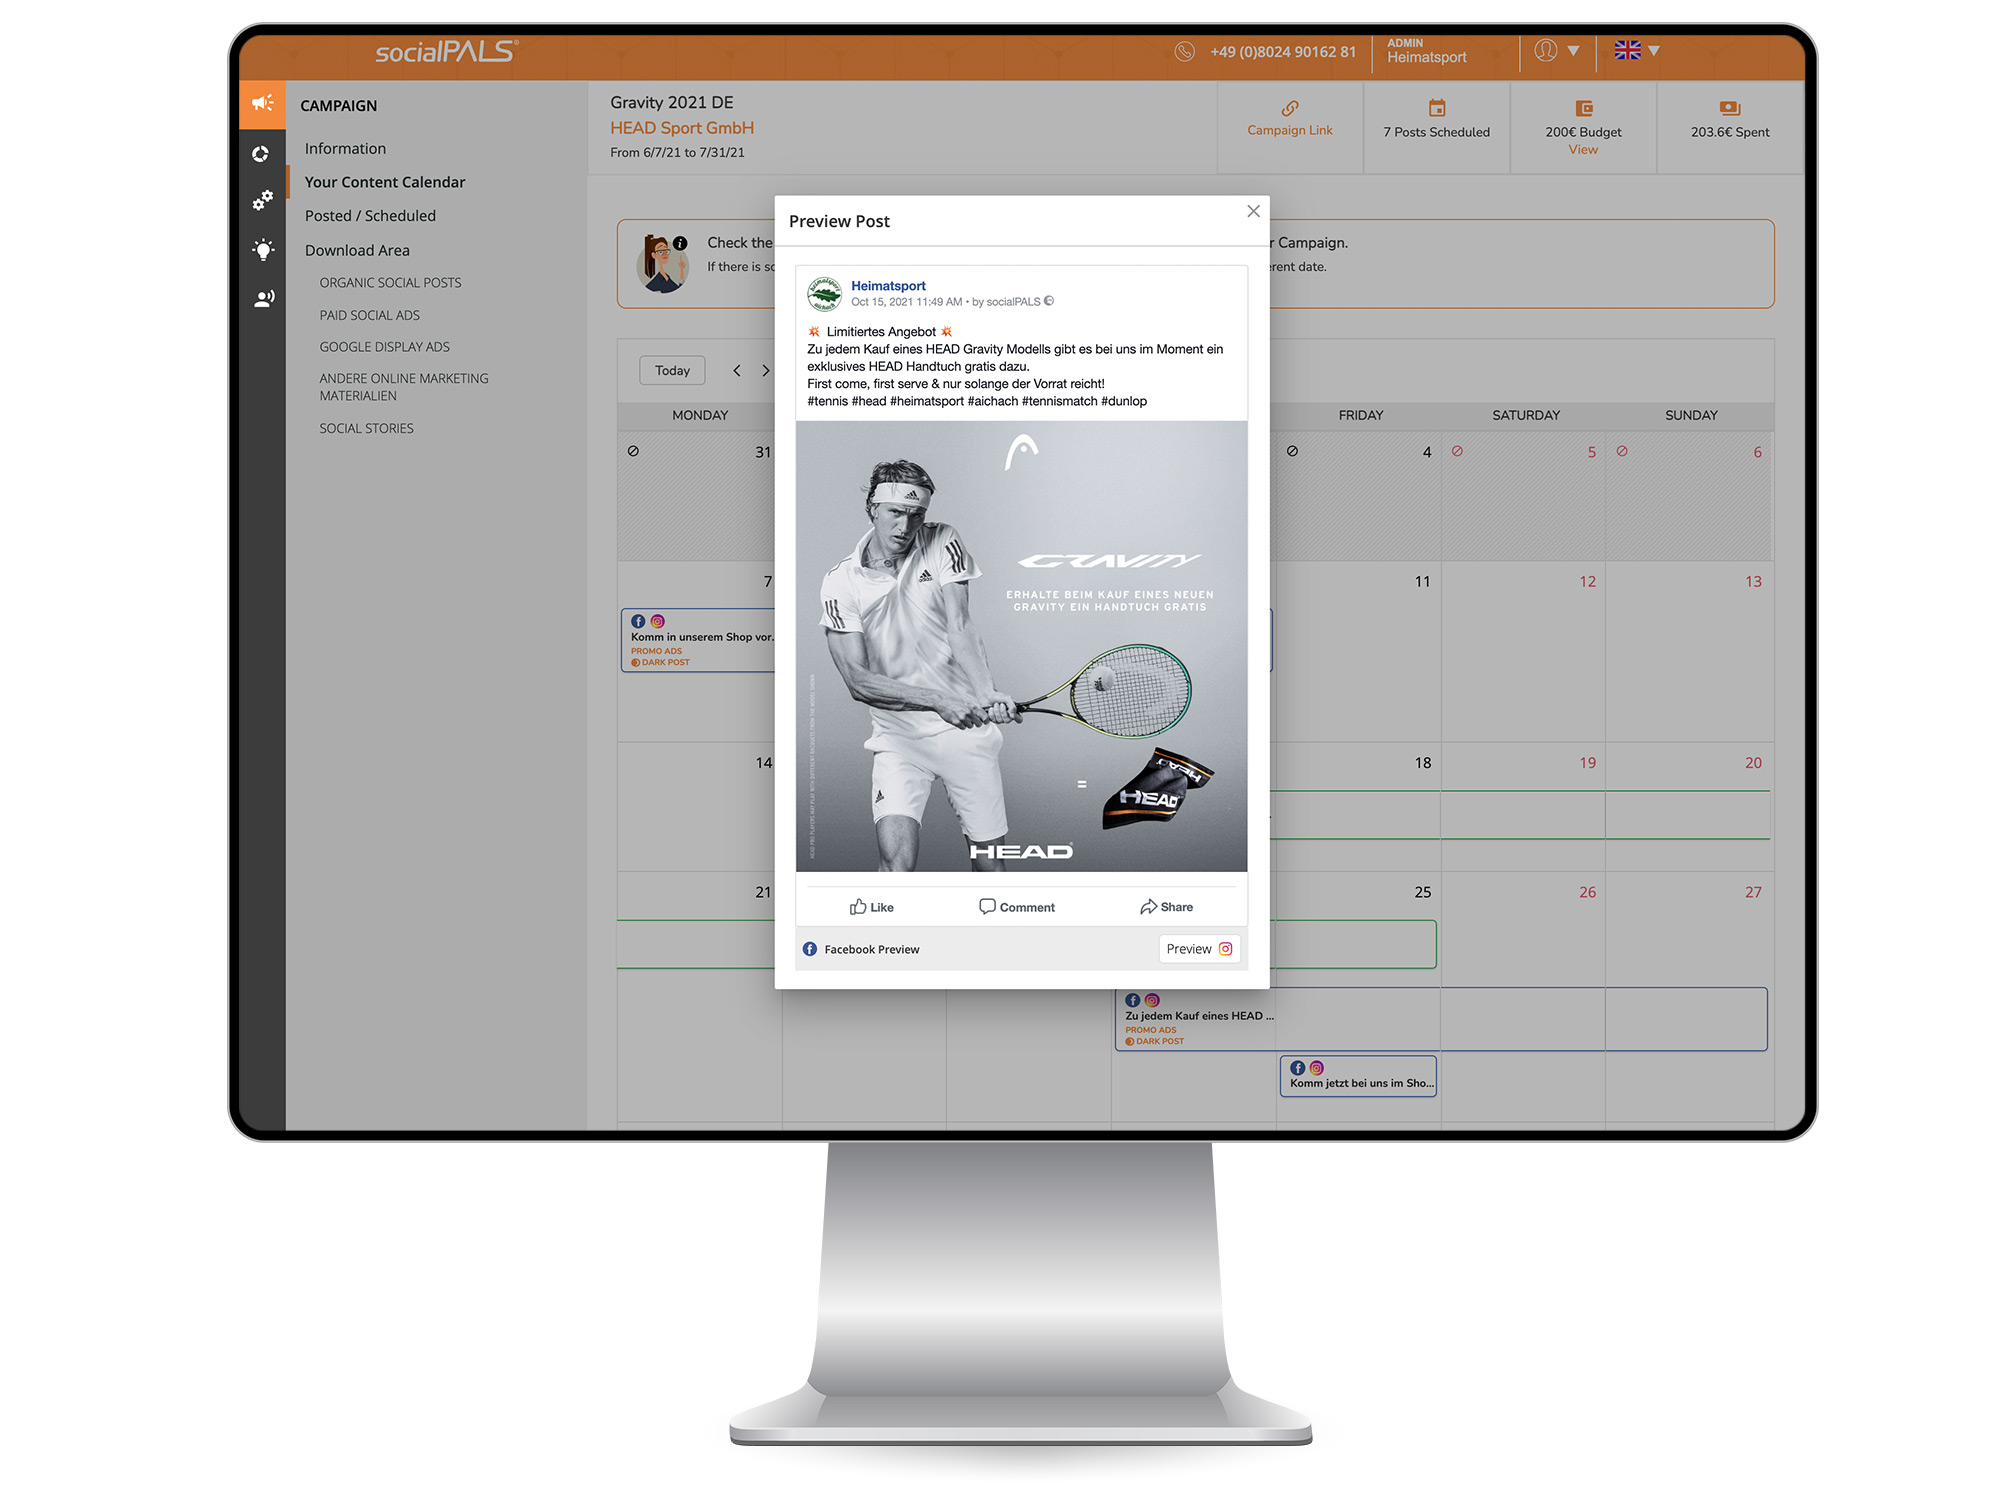 With the content calendar, every post can be individualised in no time at all.